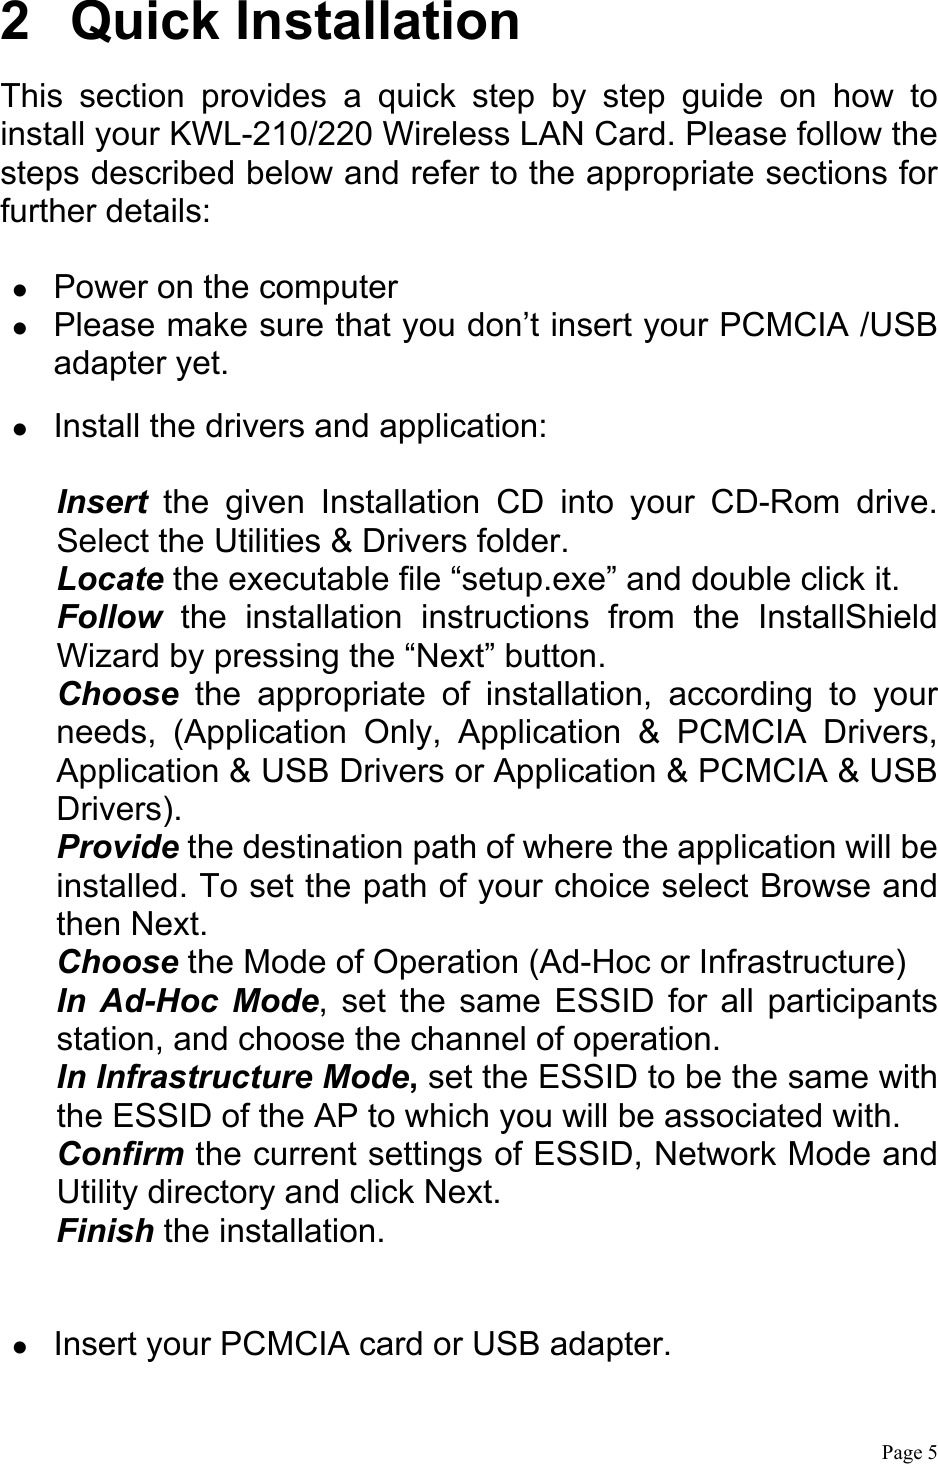  Page 5  2 Quick Installation This section provides a quick step by step guide on how to install your KWL-210/220 Wireless LAN Card. Please follow the steps described below and refer to the appropriate sections for further details:    Power on the computer   Please make sure that you don’t insert your PCMCIA /USB adapter yet.    Install the drivers and application:  Insert the given Installation CD into your CD-Rom drive. Select the Utilities &amp; Drivers folder. Locate the executable file “setup.exe” and double click it. Follow the installation instructions from the InstallShield Wizard by pressing the “Next” button. Choose the appropriate of installation, according to your needs, (Application Only, Application &amp; PCMCIA Drivers, Application &amp; USB Drivers or Application &amp; PCMCIA &amp; USB Drivers). Provide the destination path of where the application will be installed. To set the path of your choice select Browse and then Next. Choose the Mode of Operation (Ad-Hoc or Infrastructure)   In Ad-Hoc Mode, set the same ESSID for all participants station, and choose the channel of operation. In Infrastructure Mode, set the ESSID to be the same with the ESSID of the AP to which you will be associated with. Confirm the current settings of ESSID, Network Mode and Utility directory and click Next. Finish the installation.    Insert your PCMCIA card or USB adapter. 